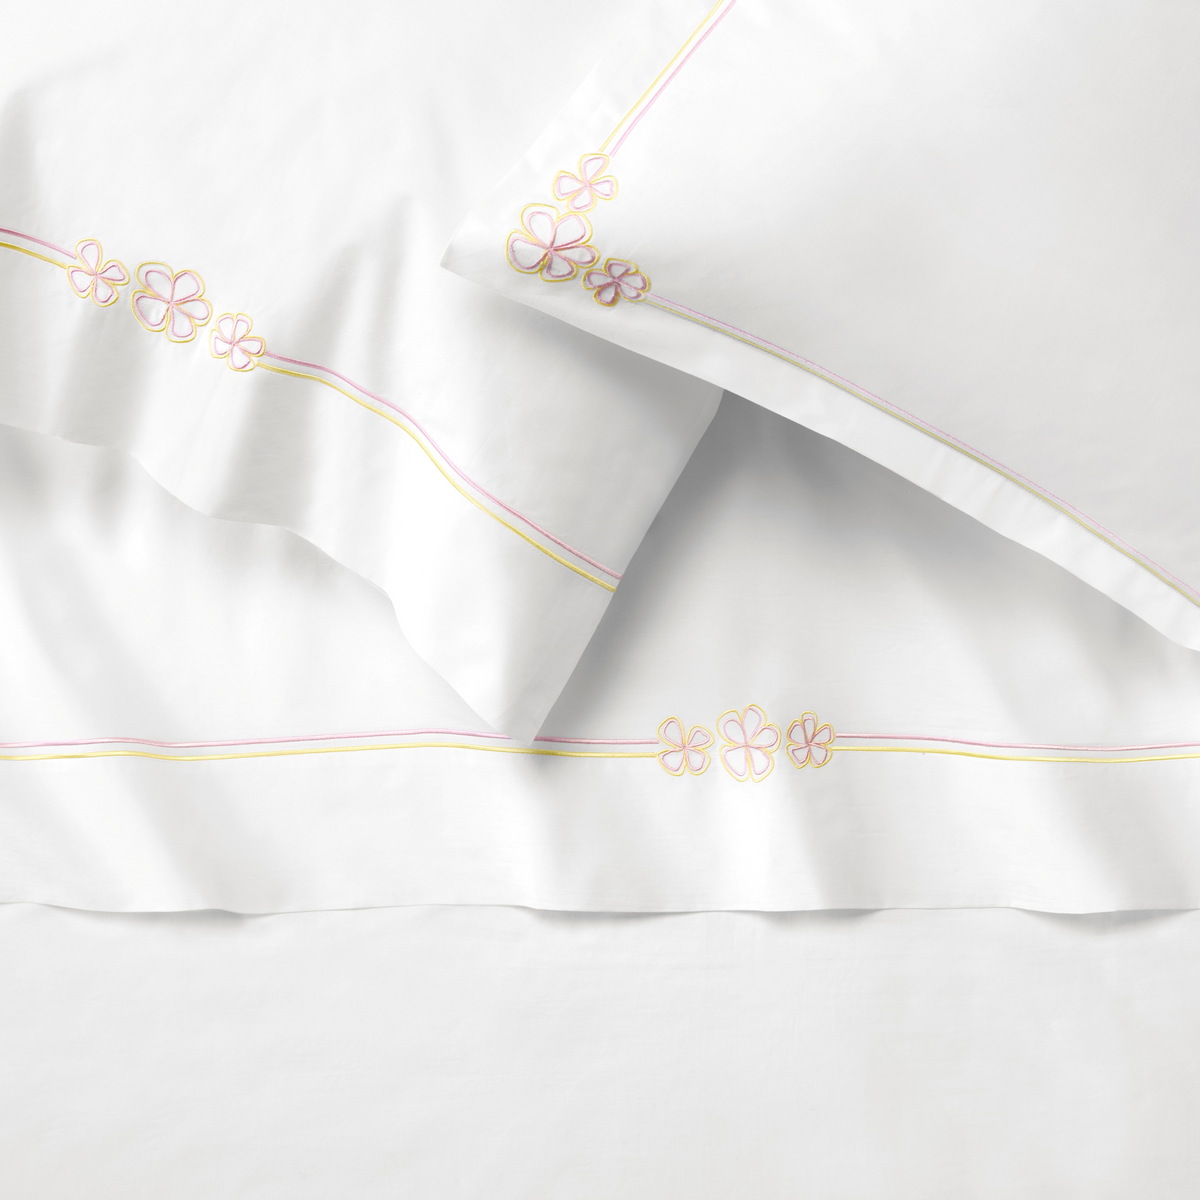 Sferra Fiorina Prato Bedding Lifestyle Sheets and Shams Textures in White/Carnation